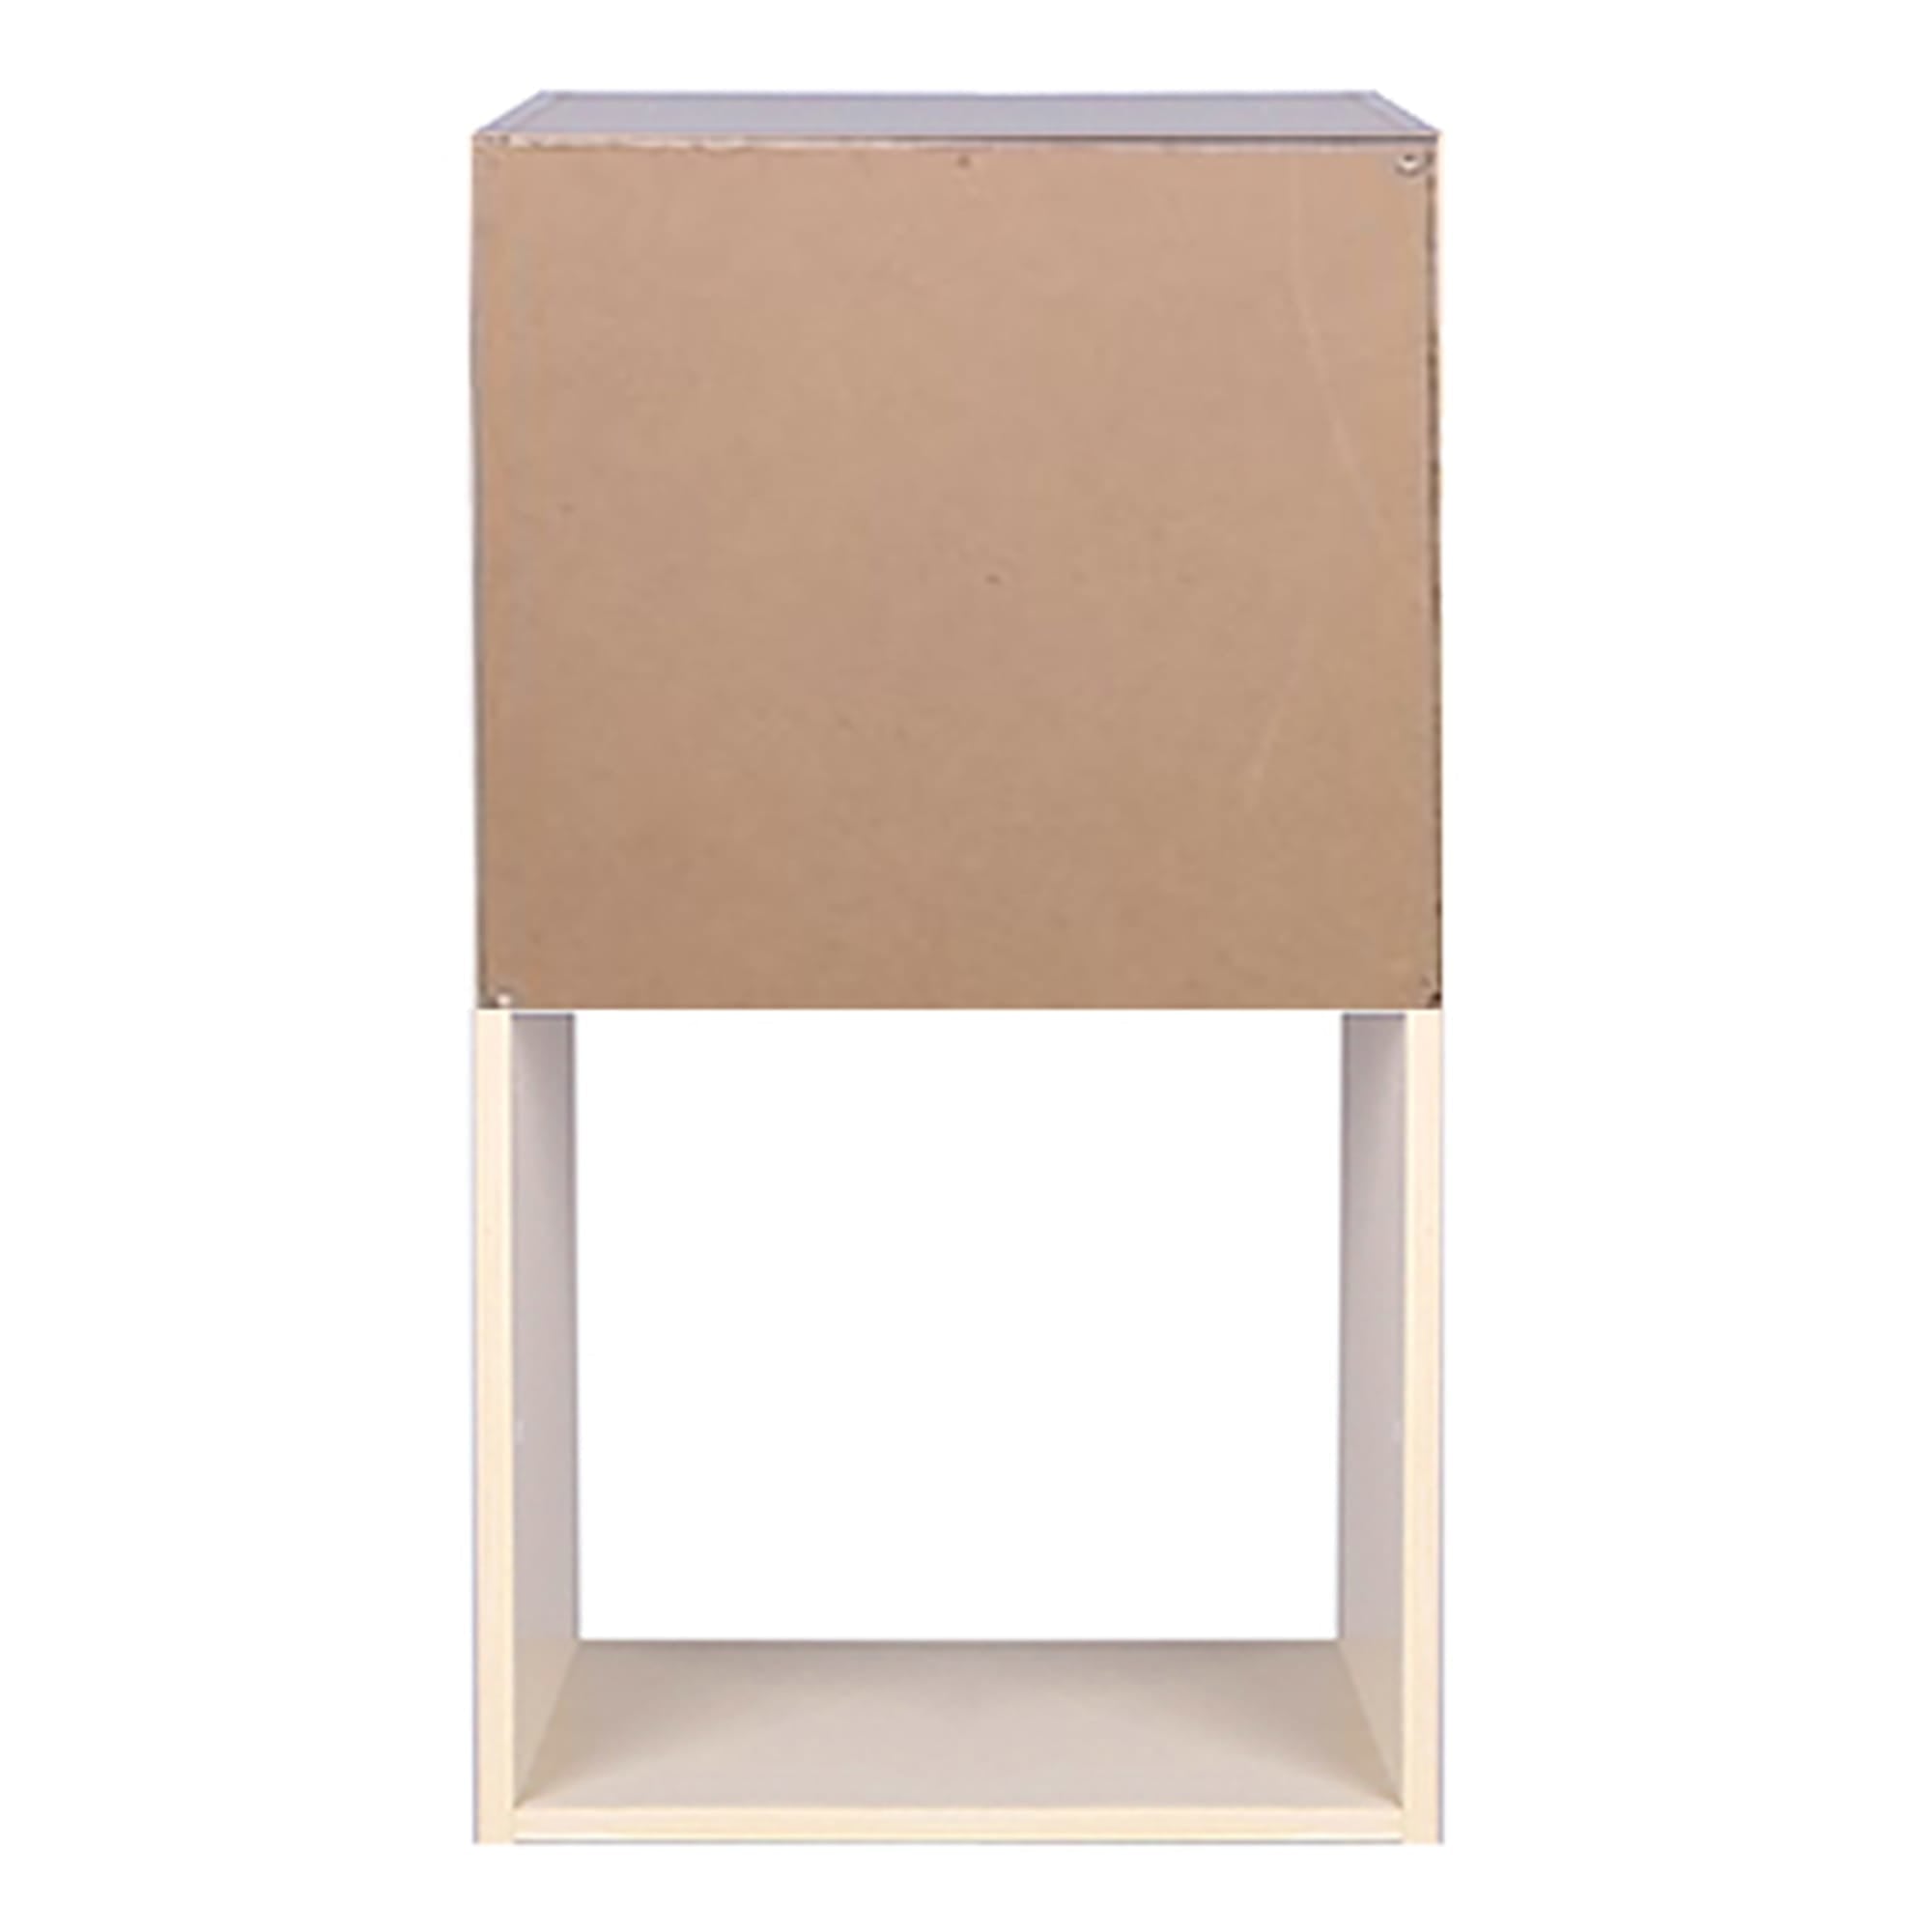 Home Basics Open and Enclosed 2 Cube MDF Storage Organizer,  Oak $18.00 EACH, CASE PACK OF 1